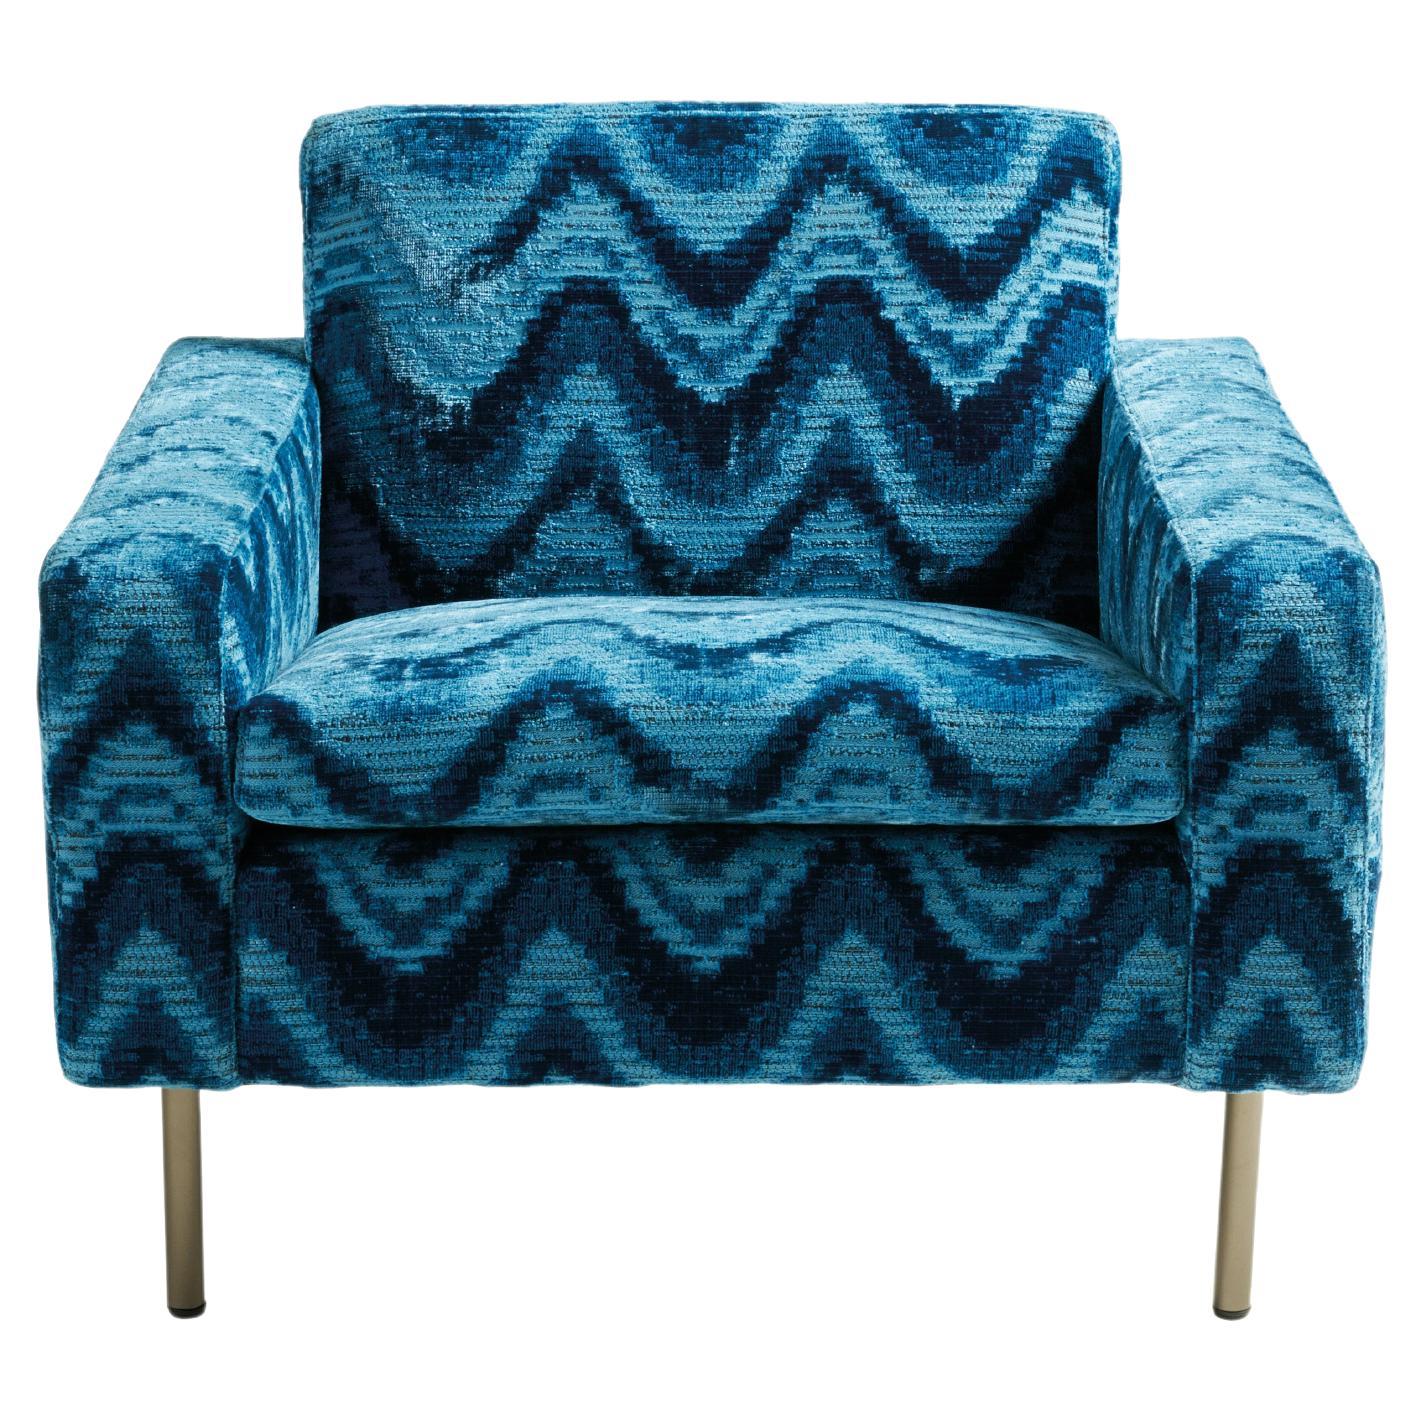 21st Century Type Armchair in Blue Jacquard Fabric by Etro Home Interiors